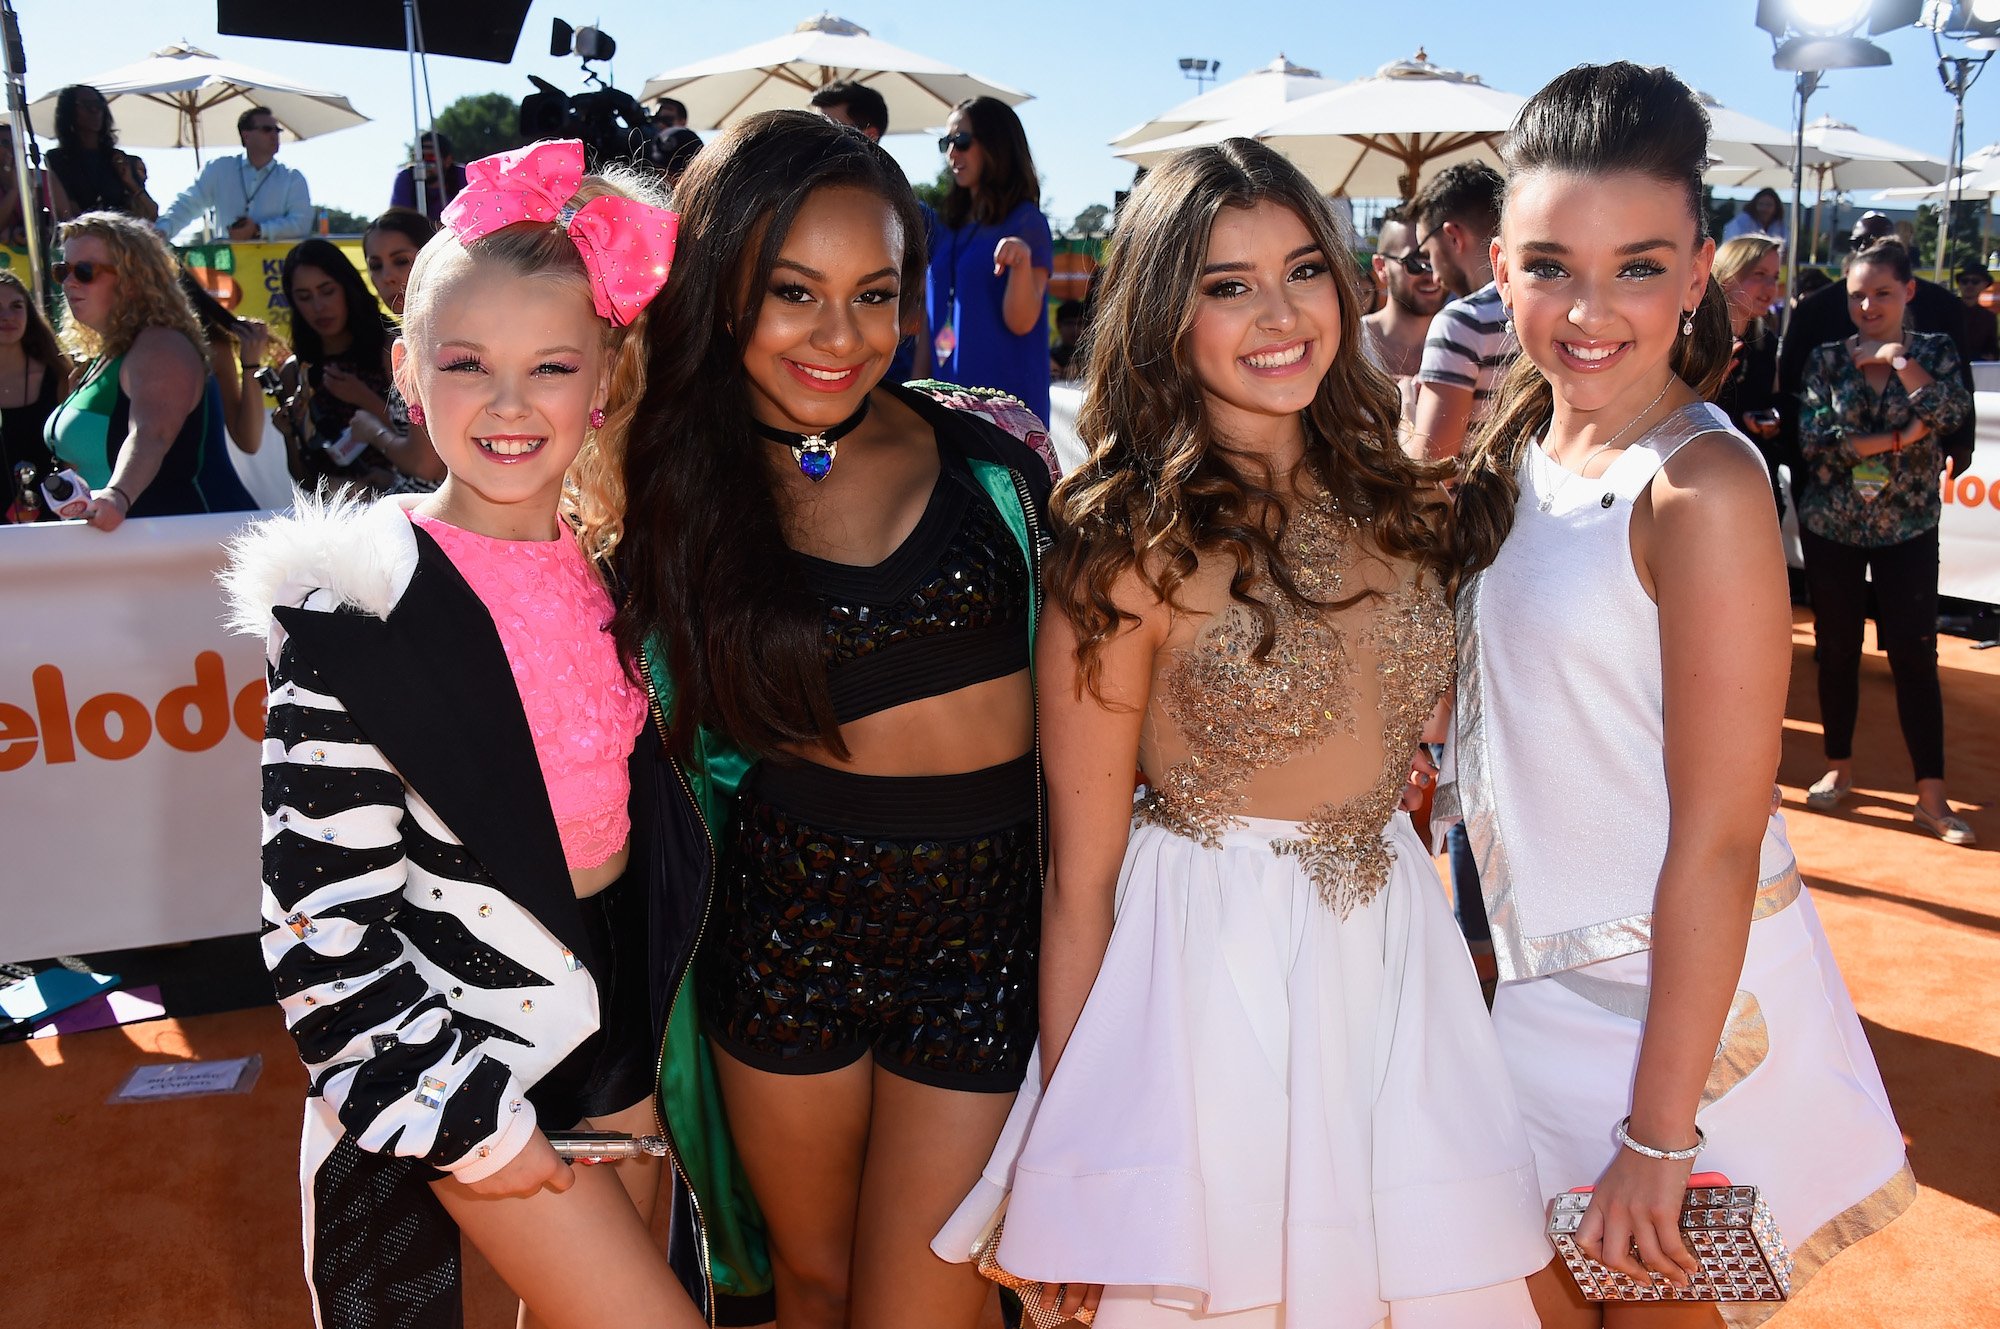 JoJo Siwa, Nia Sioux Frazier, Kalani Hilliker, and Kendall Vertes at Nickelodeon's 28th Annual Kids' Choice Awards on March 28, 2015.